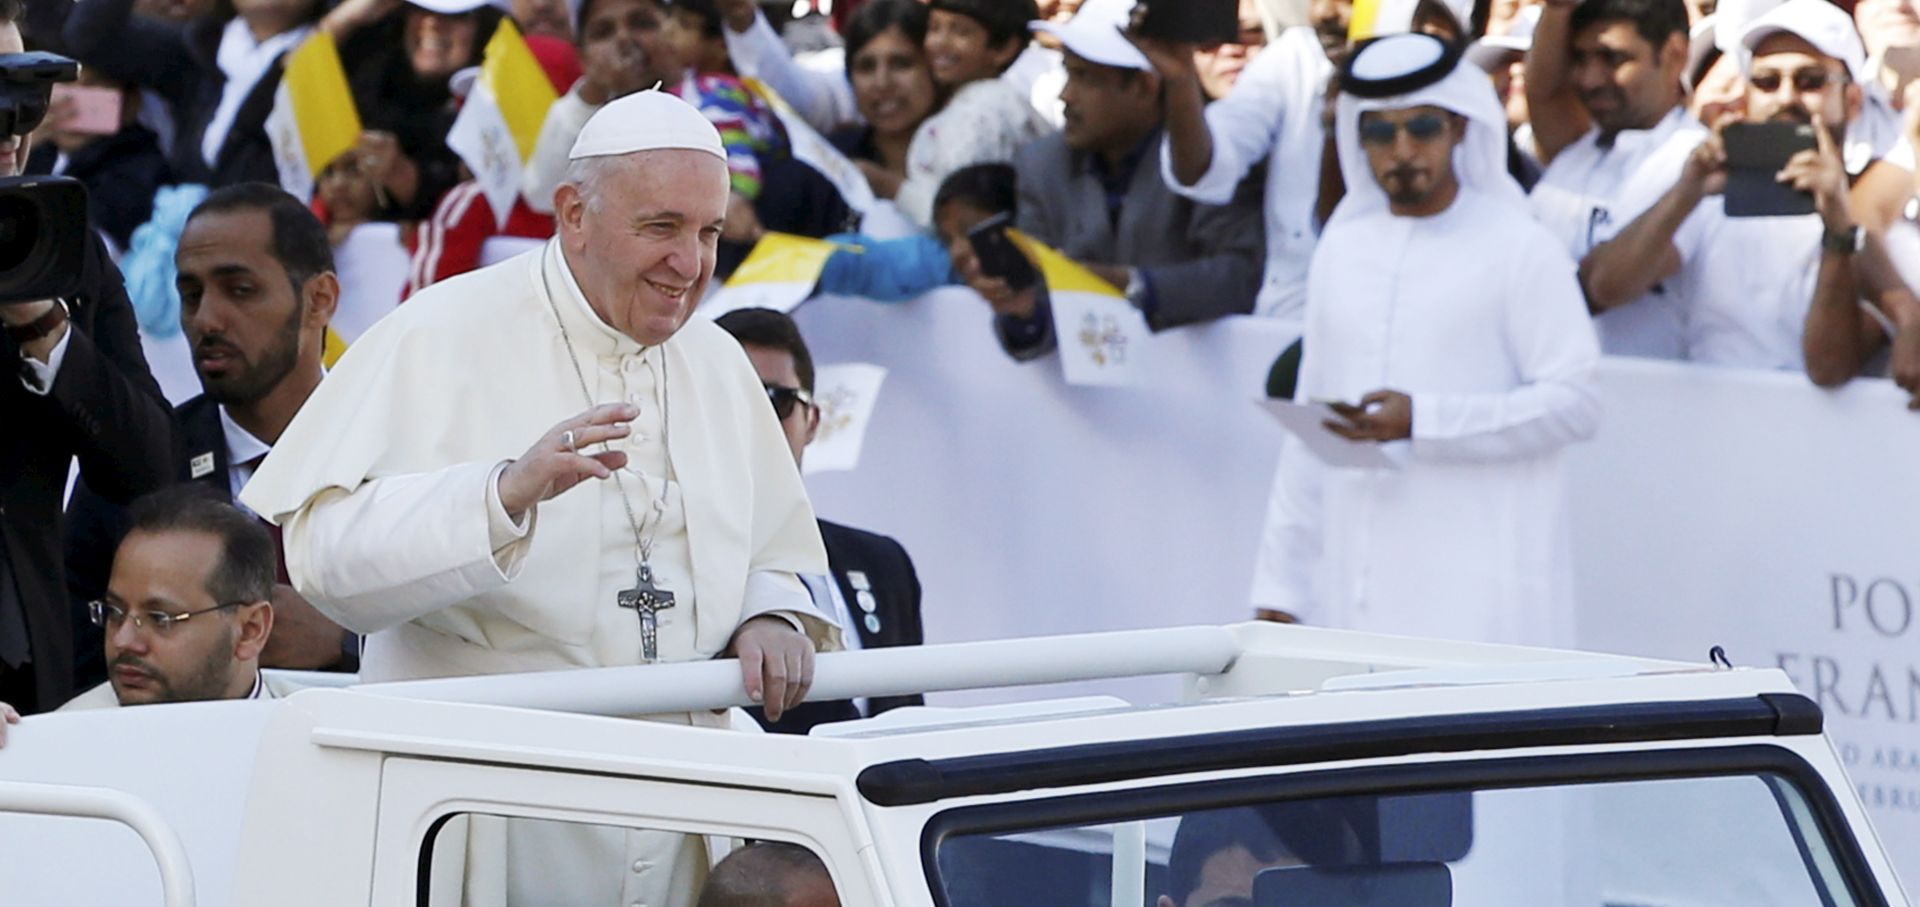 epa07344414 His Holiness Pope Francis (L), head of Catholic Church, arrives to lead a papal mass at Zayed Sports City in Abu Dhabi, United Arab Emirates, 05 February 2019. Pope Francis is on three-day visit to the UAE, making him the first pontiff to visit an Arab Gulf state.  EPA/ALI HAIDER